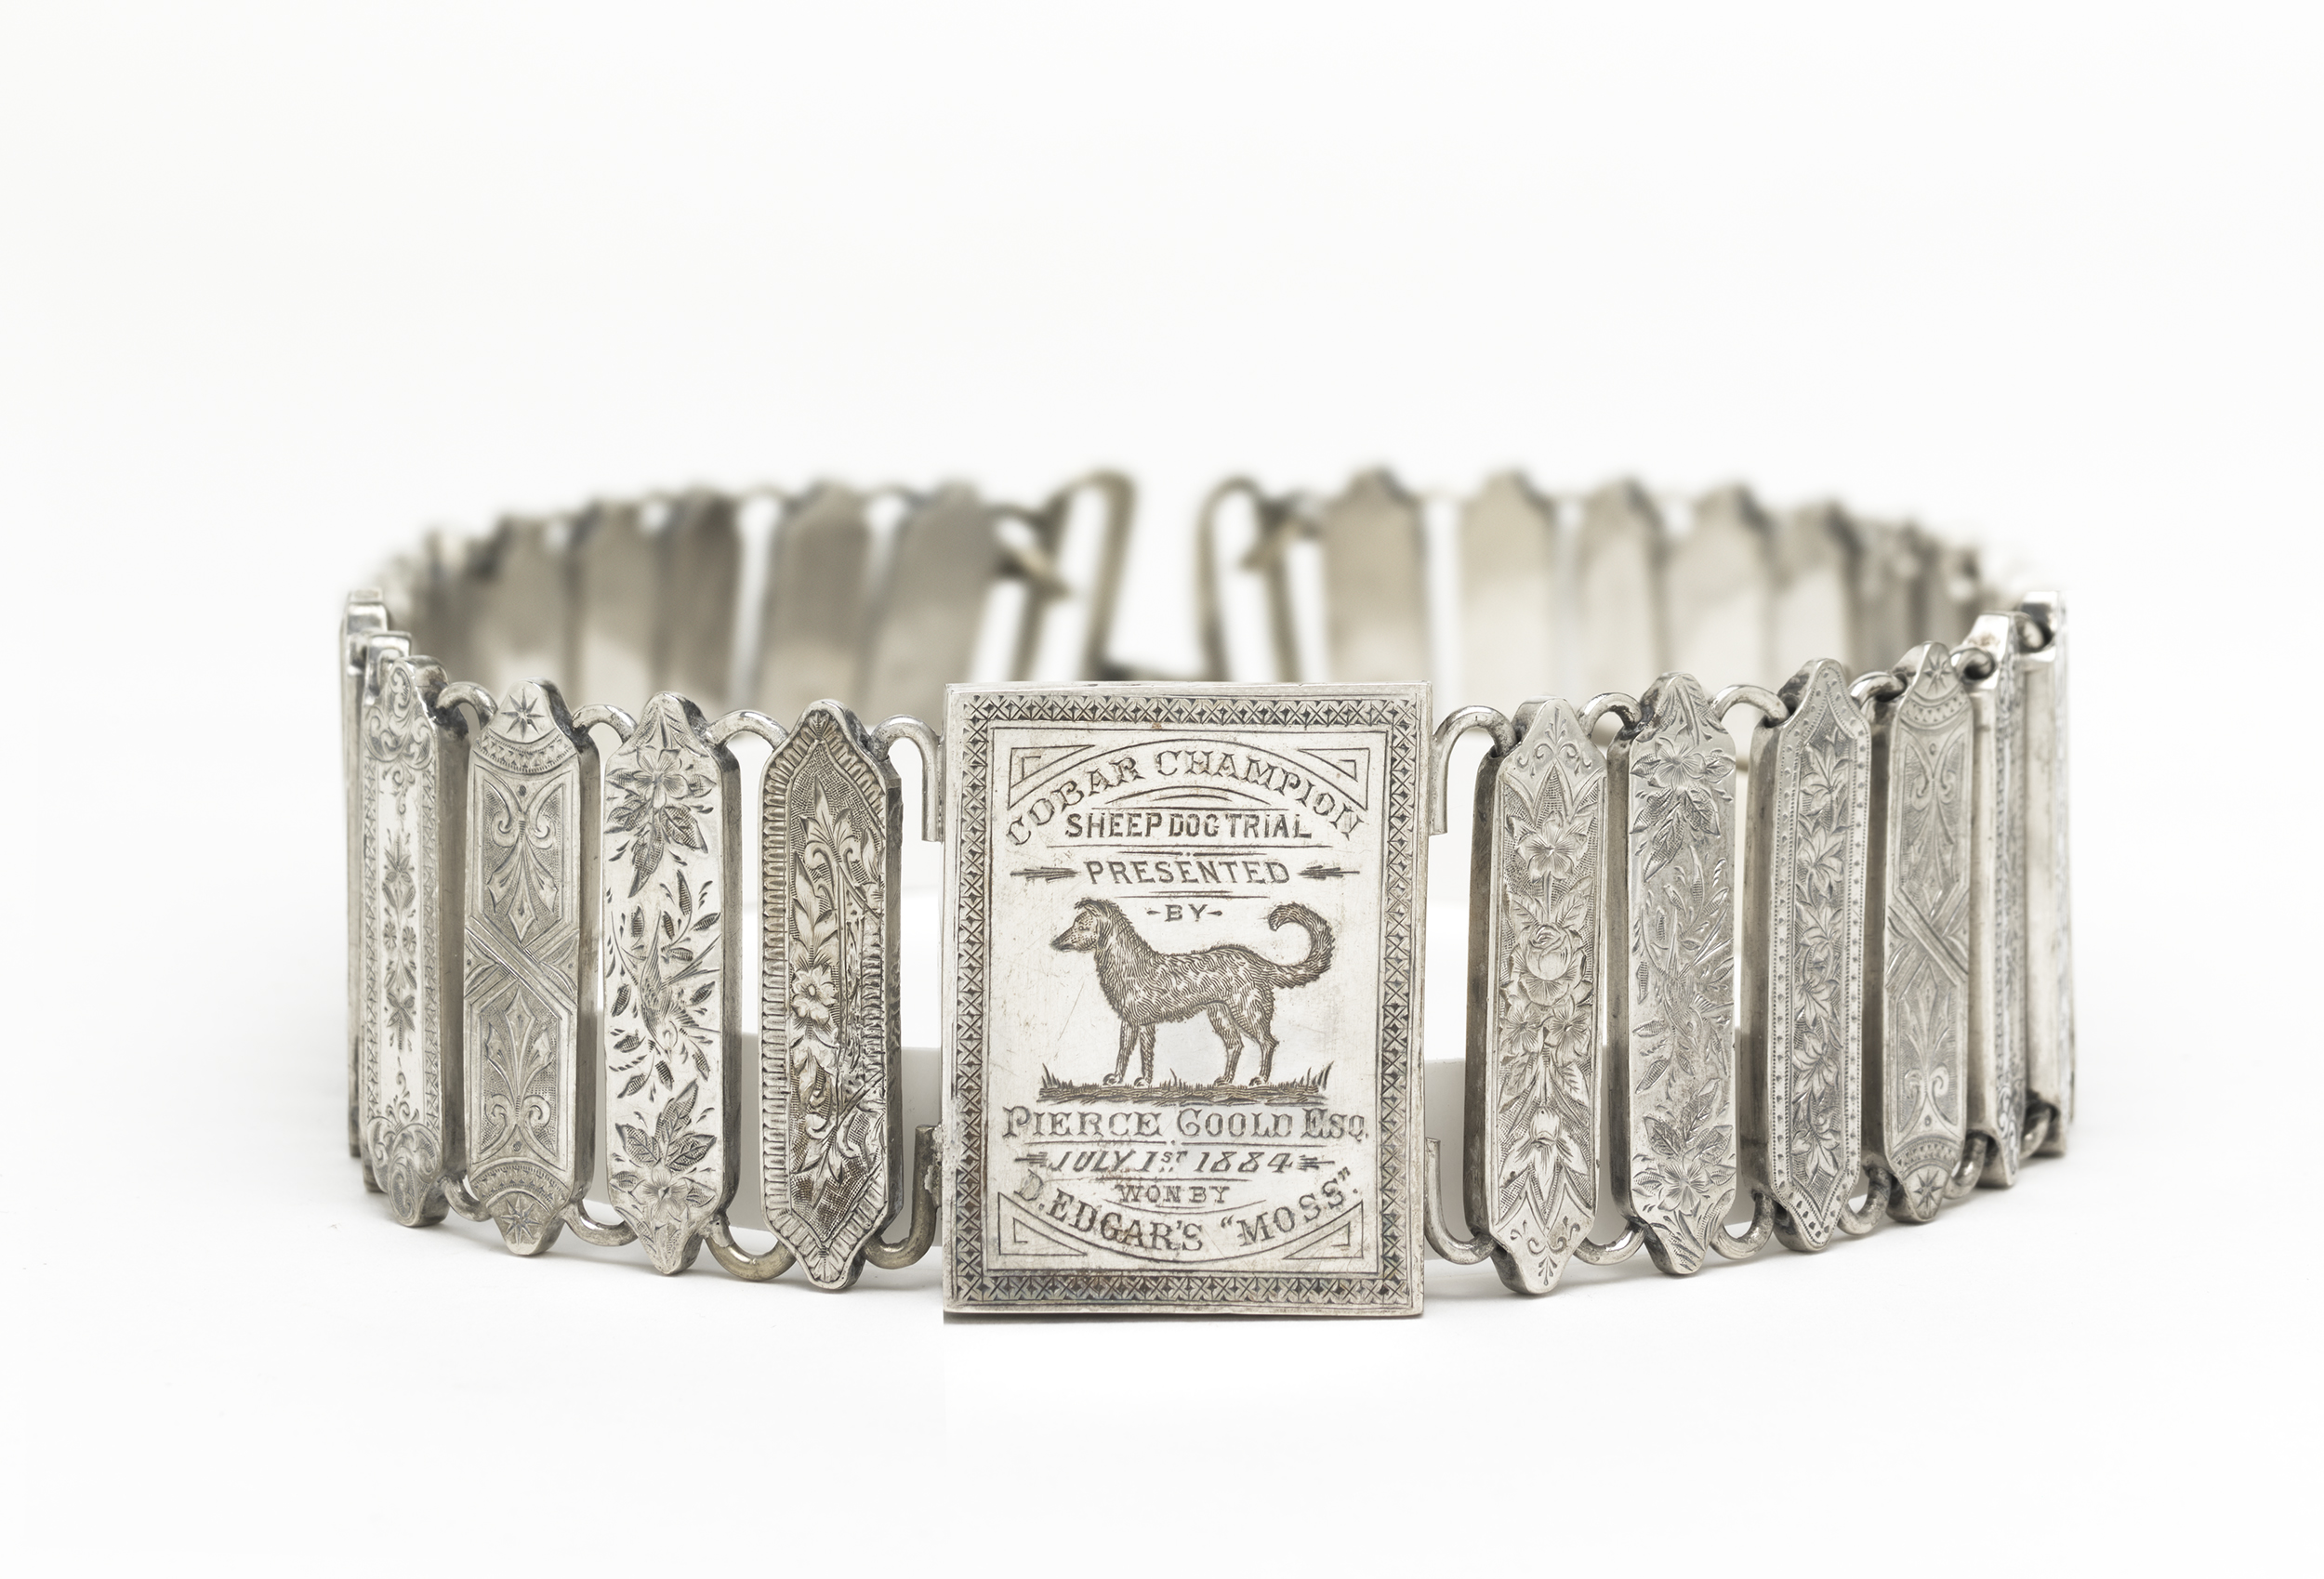   Unknown Australian silversmith,&nbsp;  Cobar Champion Sheep Dog Trial trophy collar &nbsp;c.1884,&nbsp;engraved silver.&nbsp;National Gallery of Australia, Canberra. Purchased 2008 